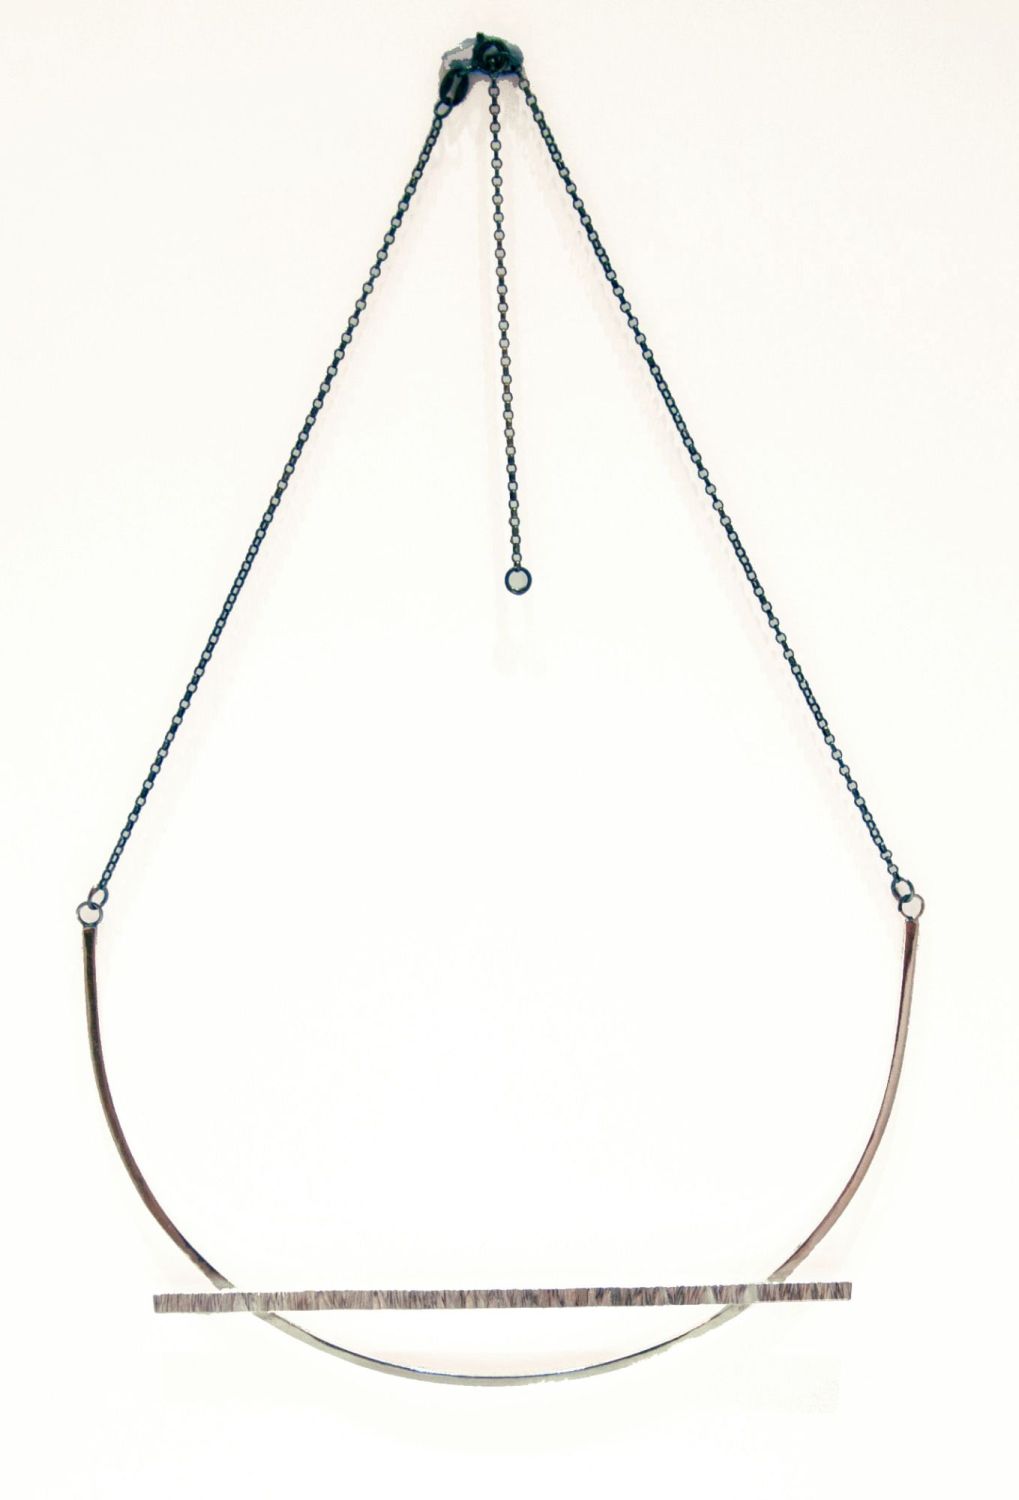 Quirky Handmade Silver Orbit Necklace